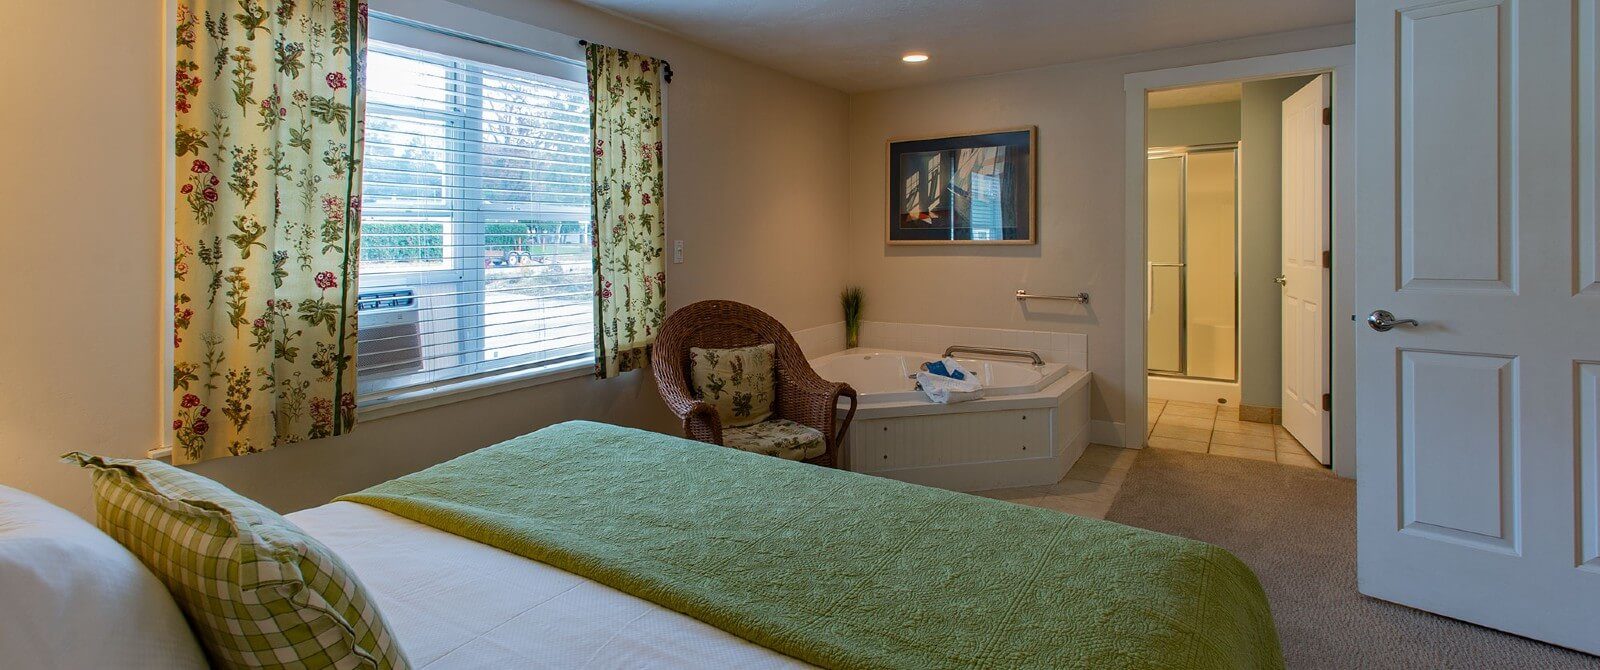 Small bedroom with bed in white and green linens, corner jacuzzi tub, window with blinds and doorway open to a bathroom